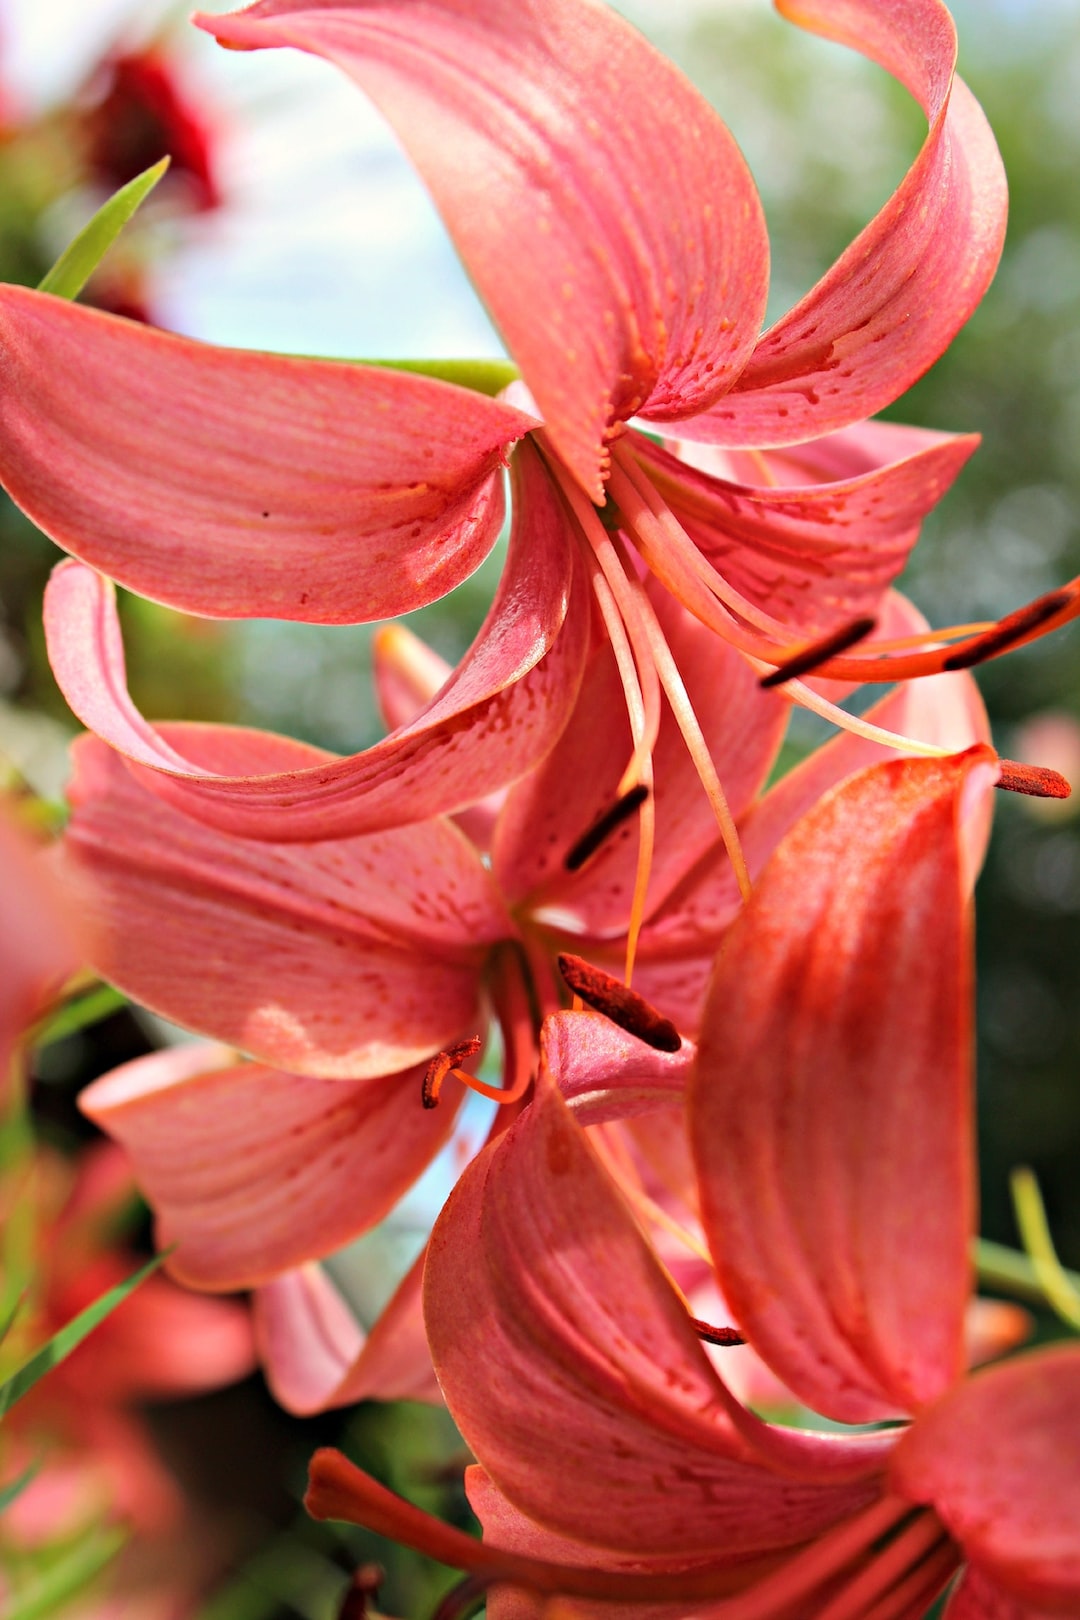 red petaled flower in close-up photo